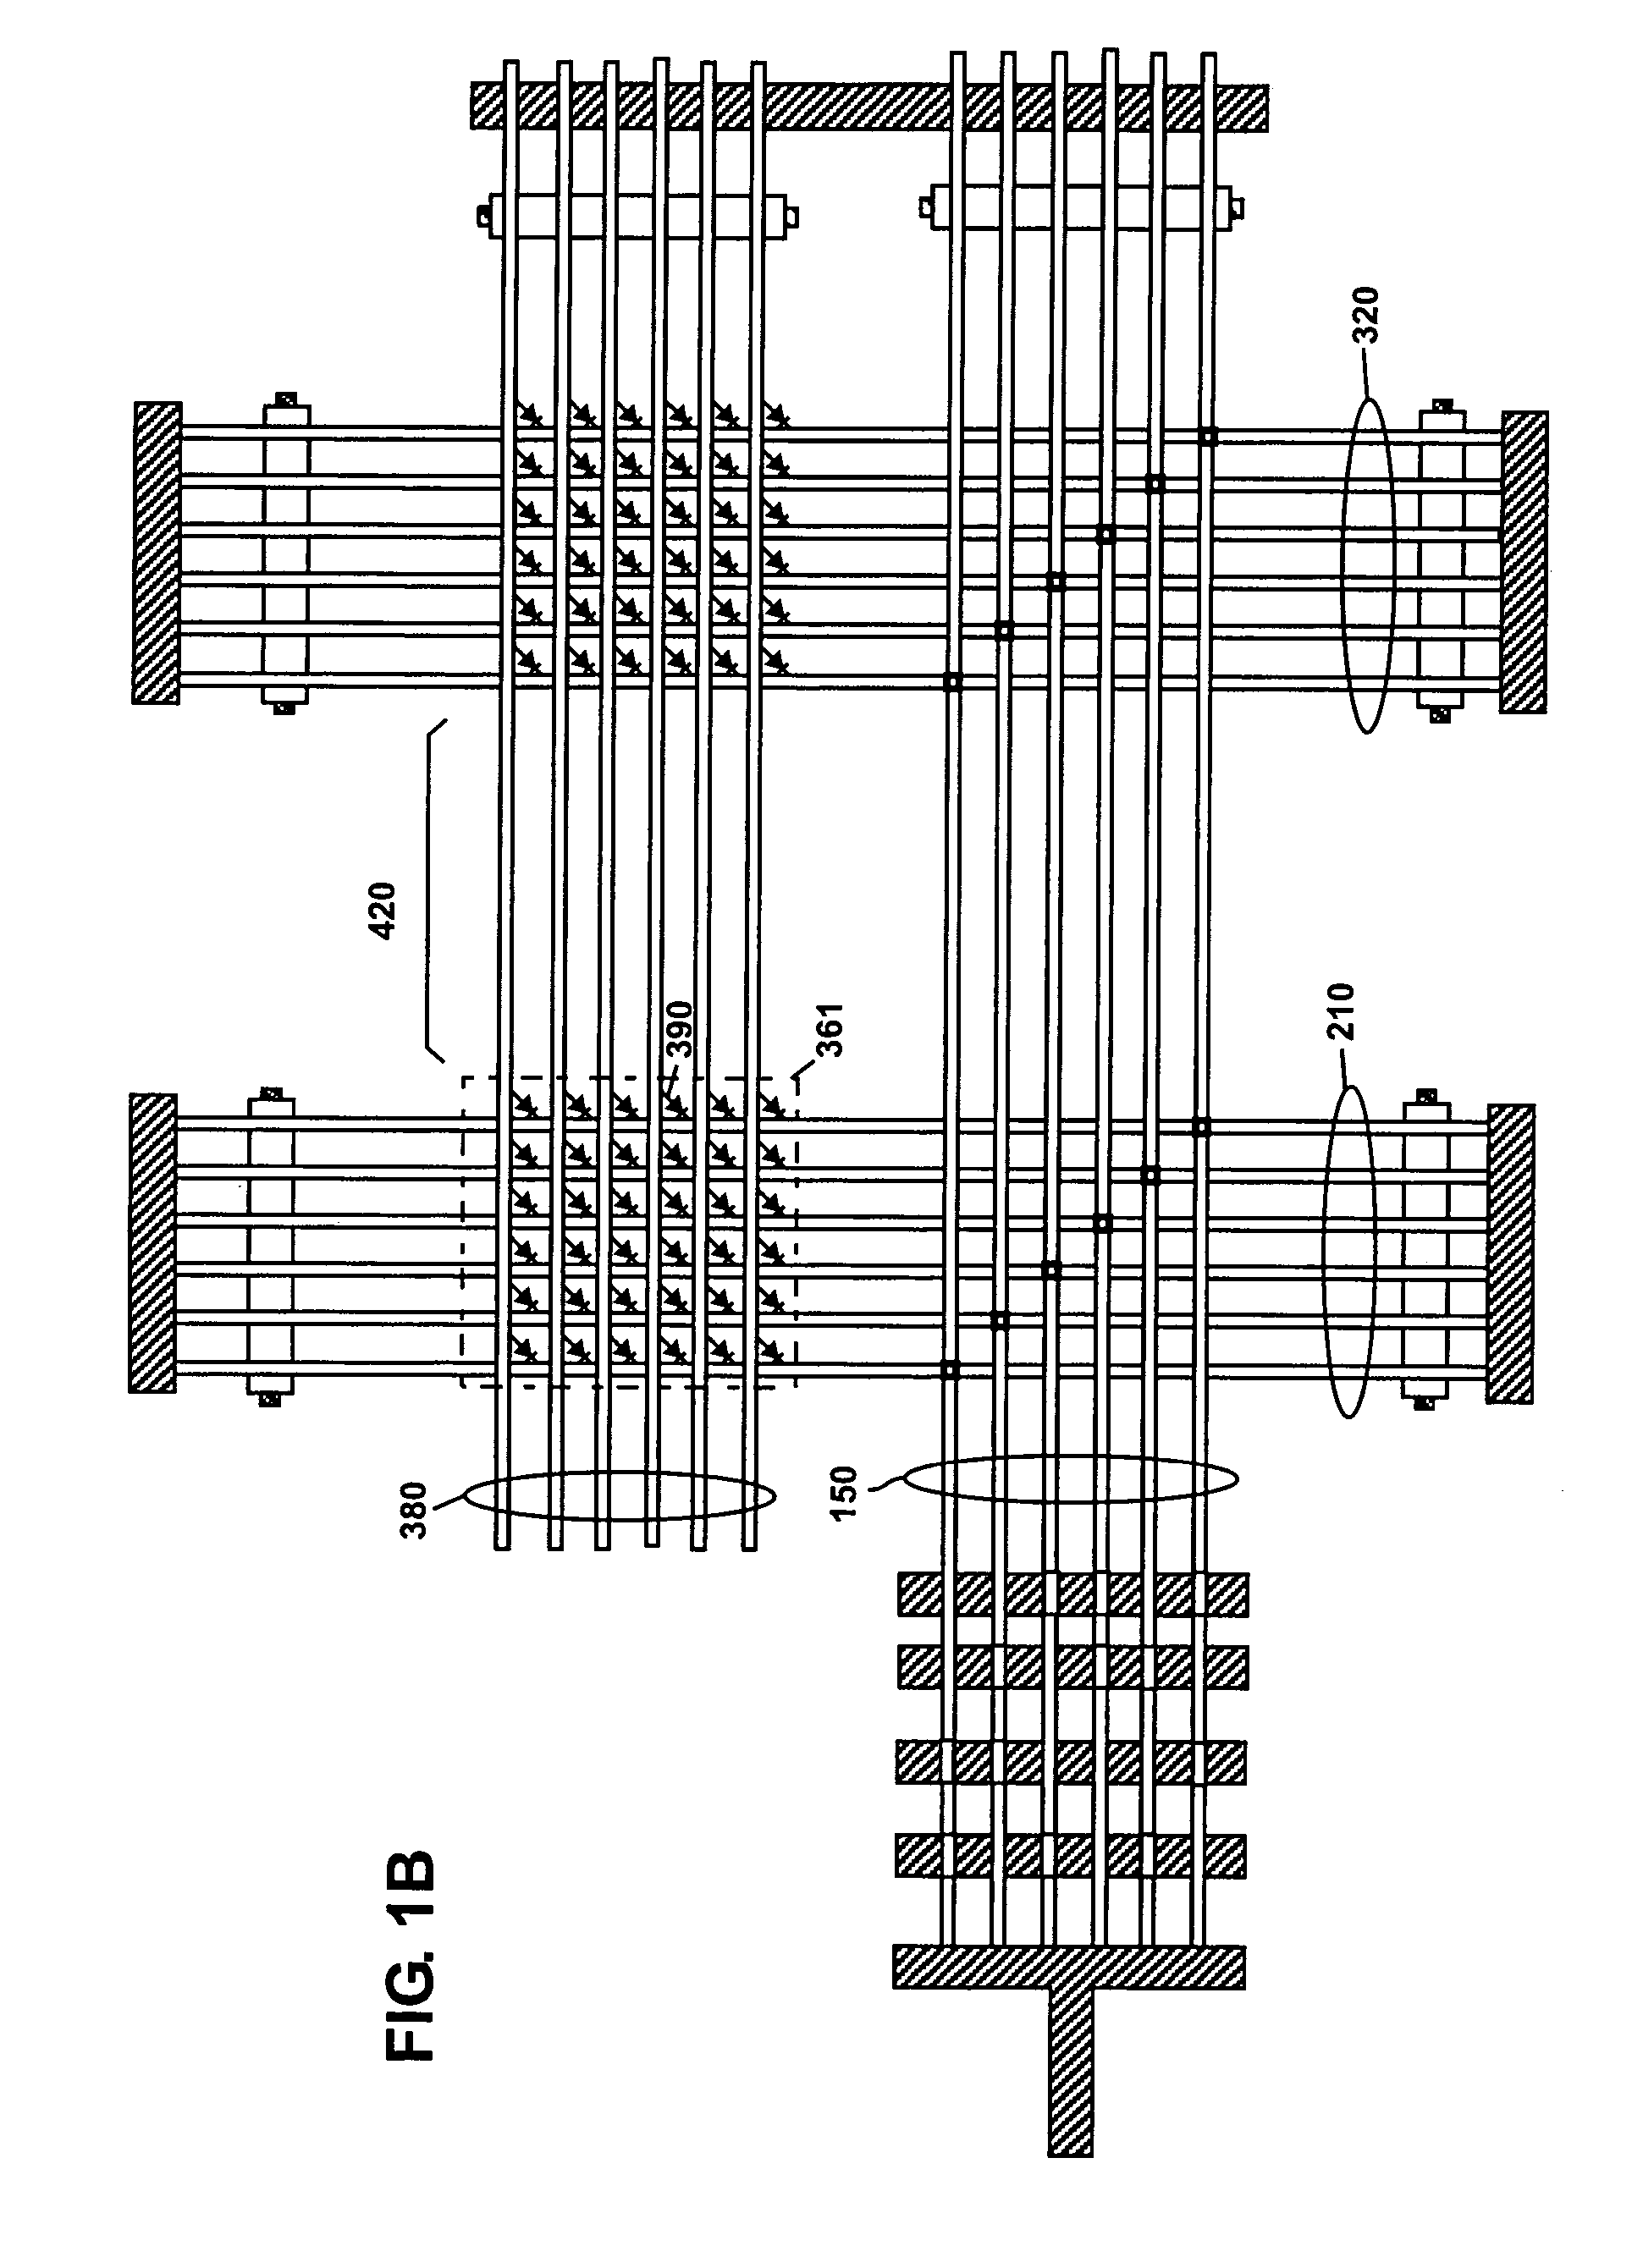 Apparatus and method of interconnecting nanoscale programmable logic array clusters